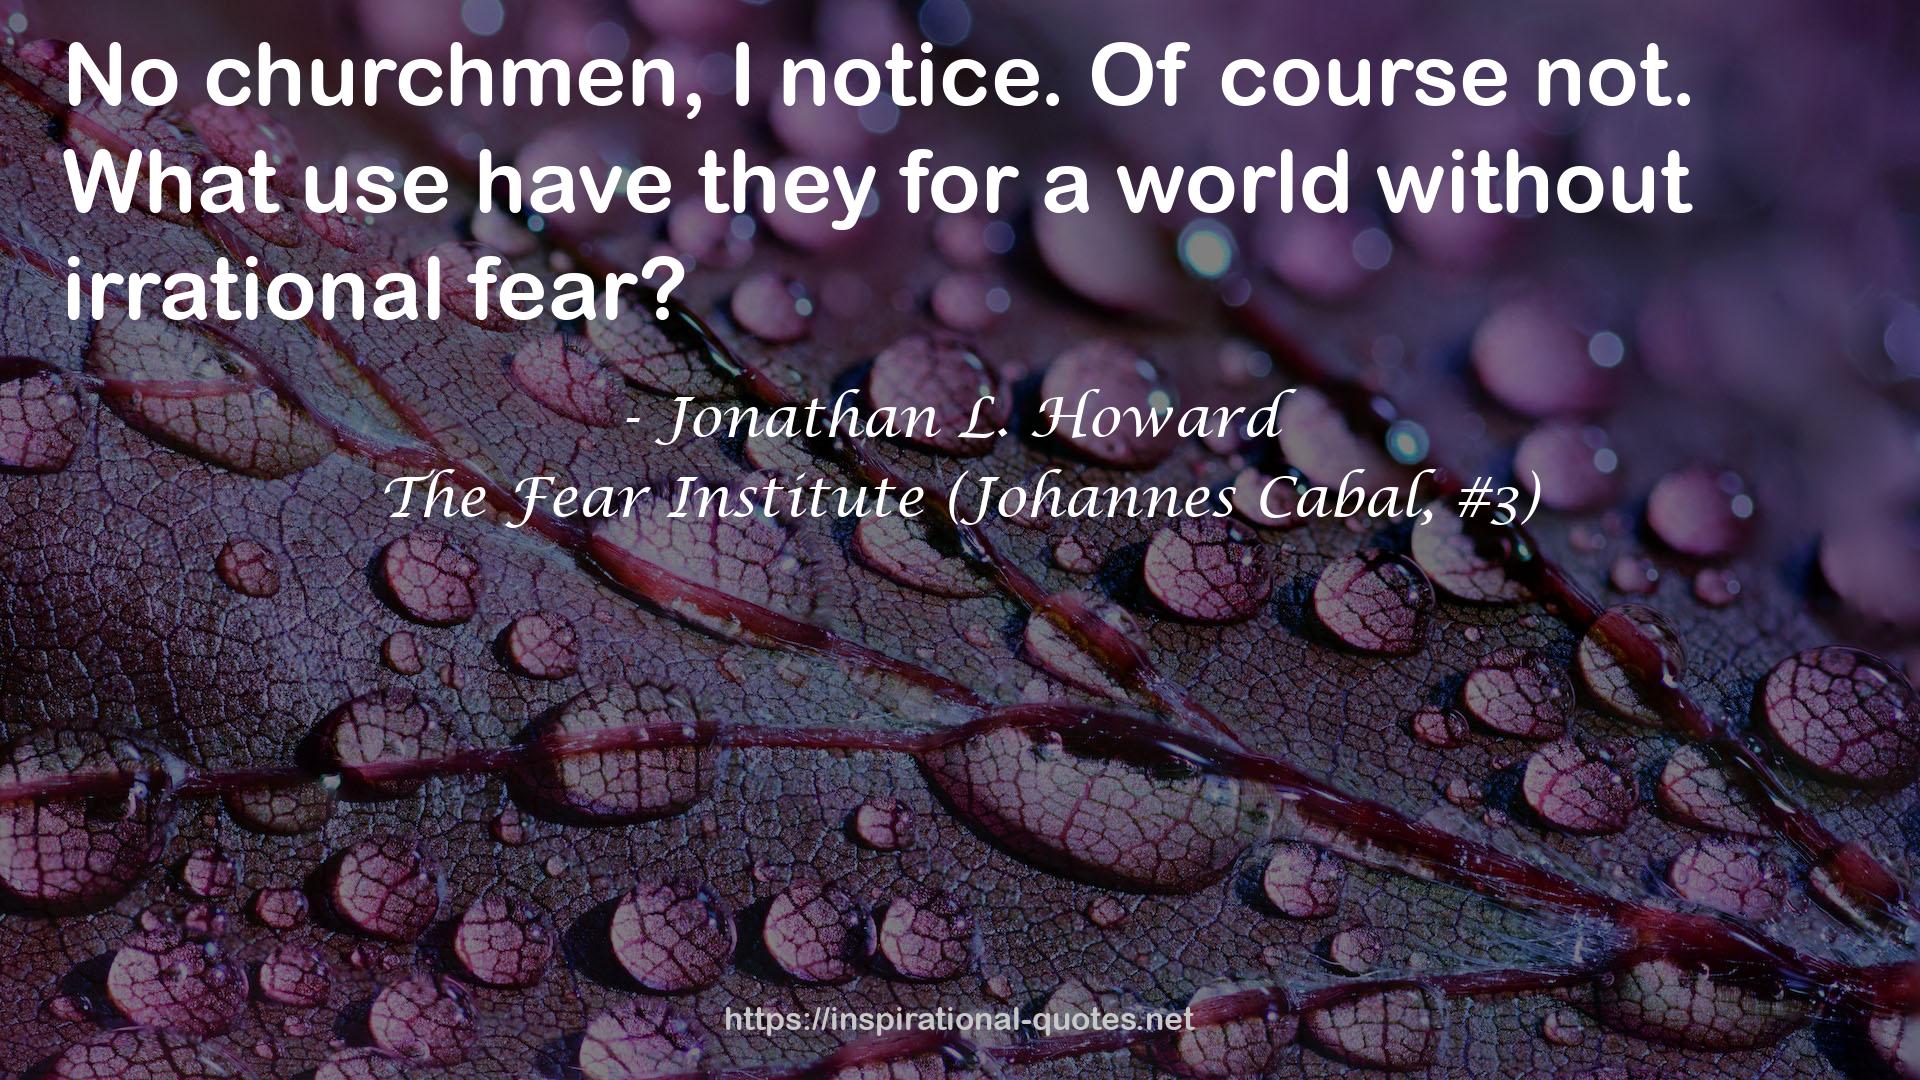 The Fear Institute (Johannes Cabal, #3) QUOTES